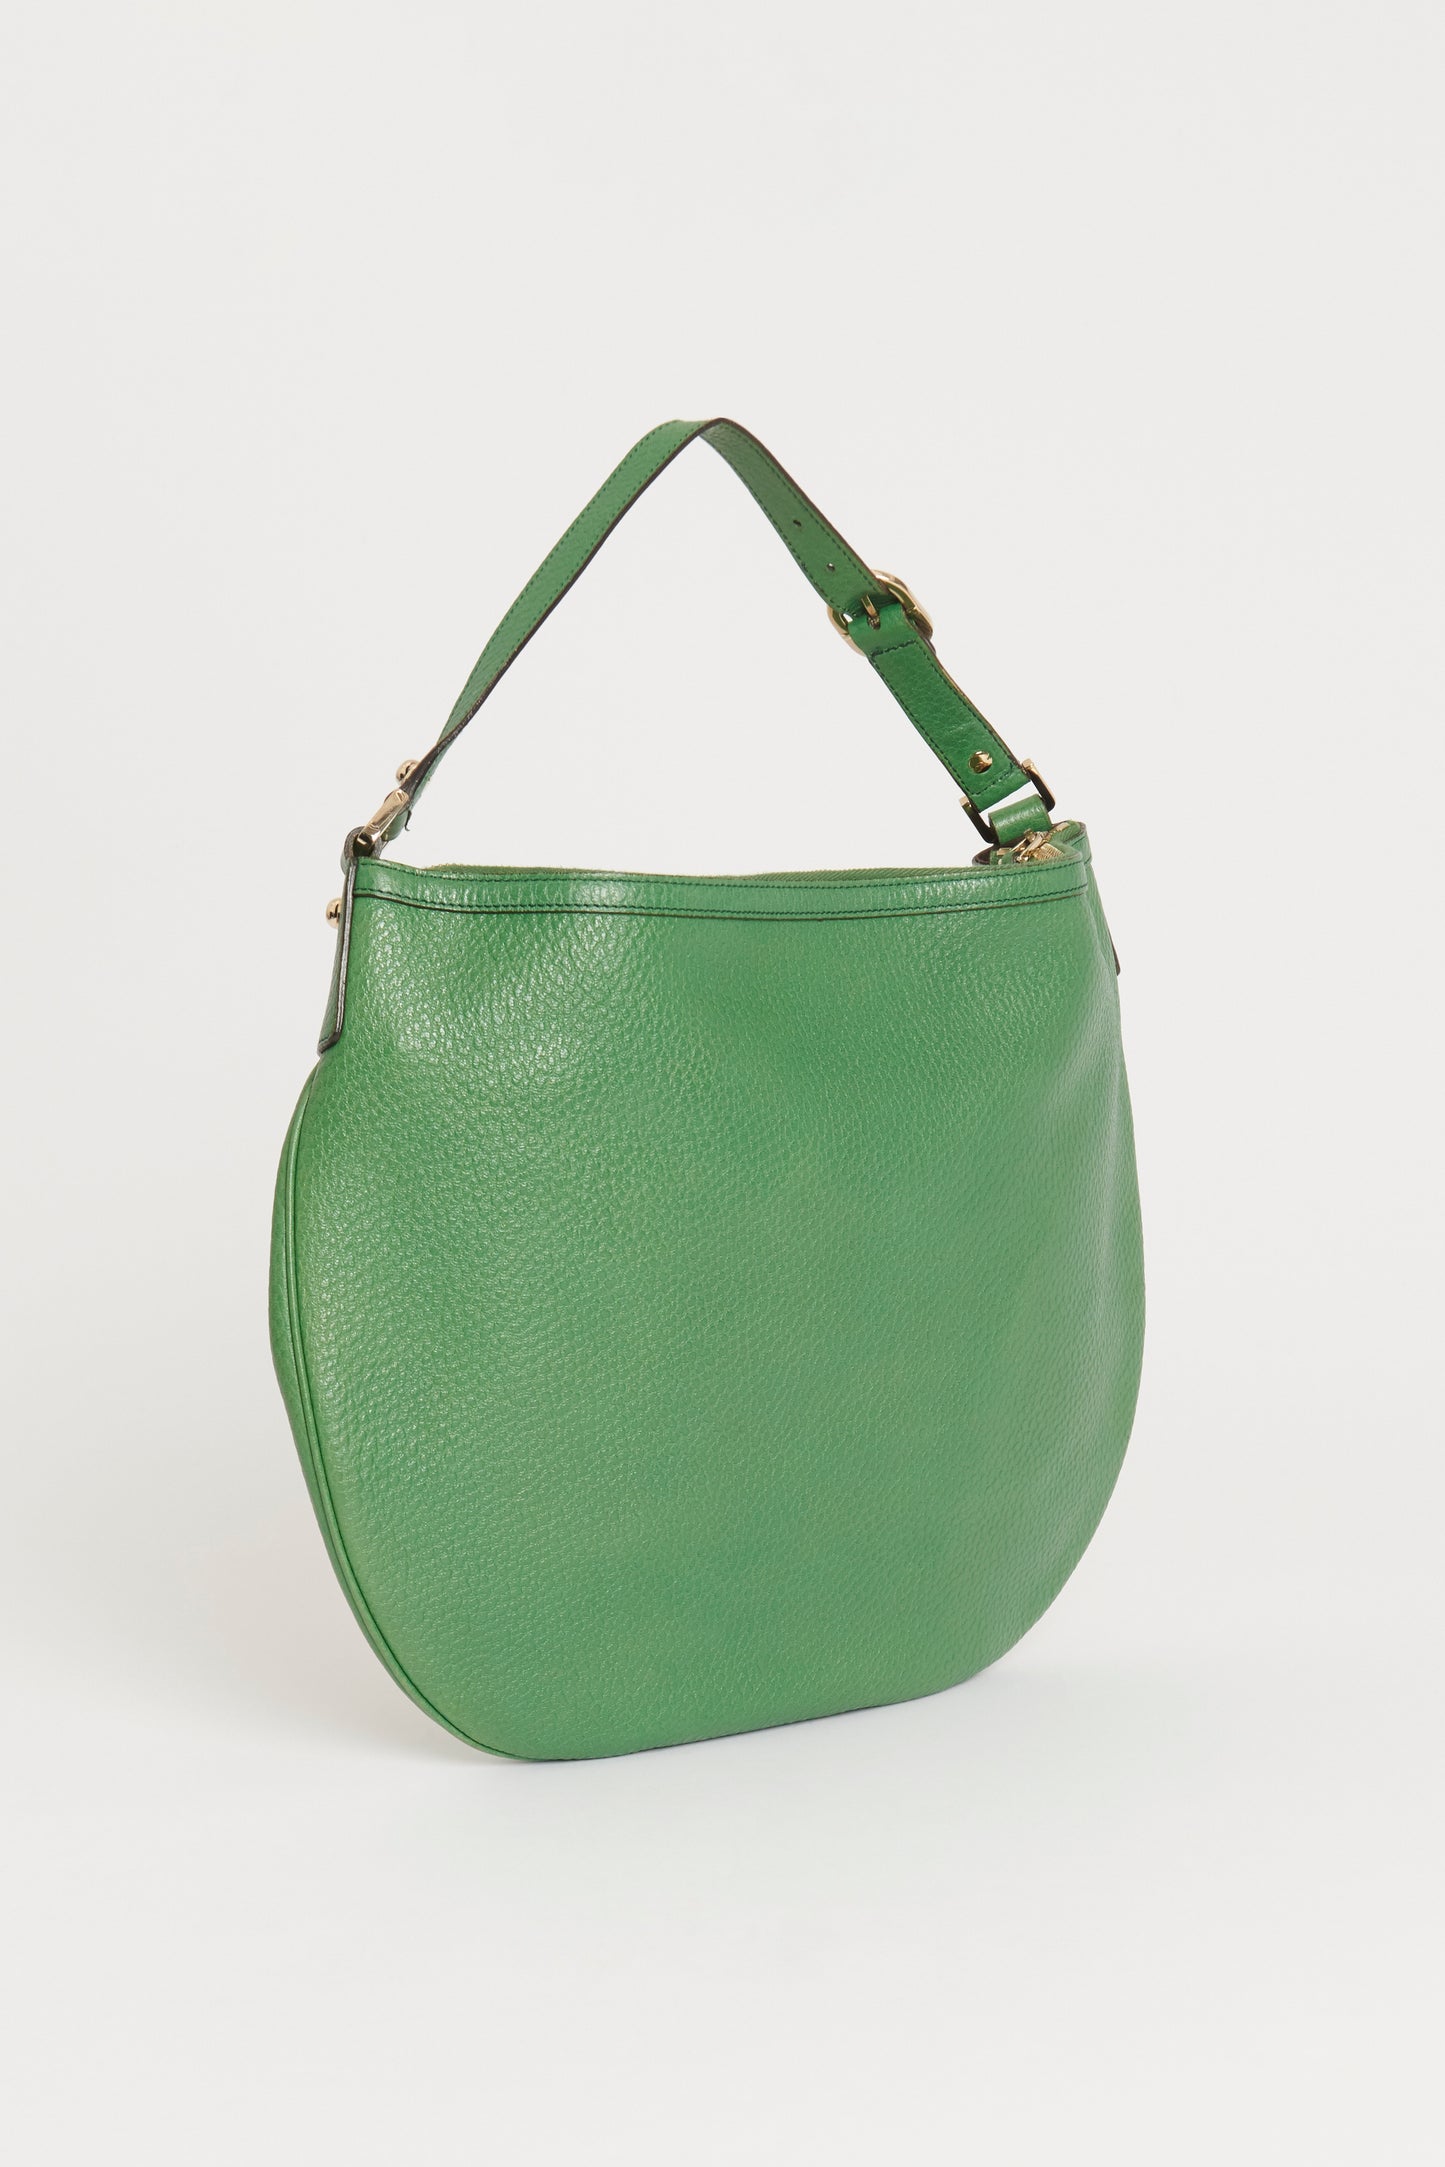 Green Leather Preowned Blondie GG Hobo Shoulder bag